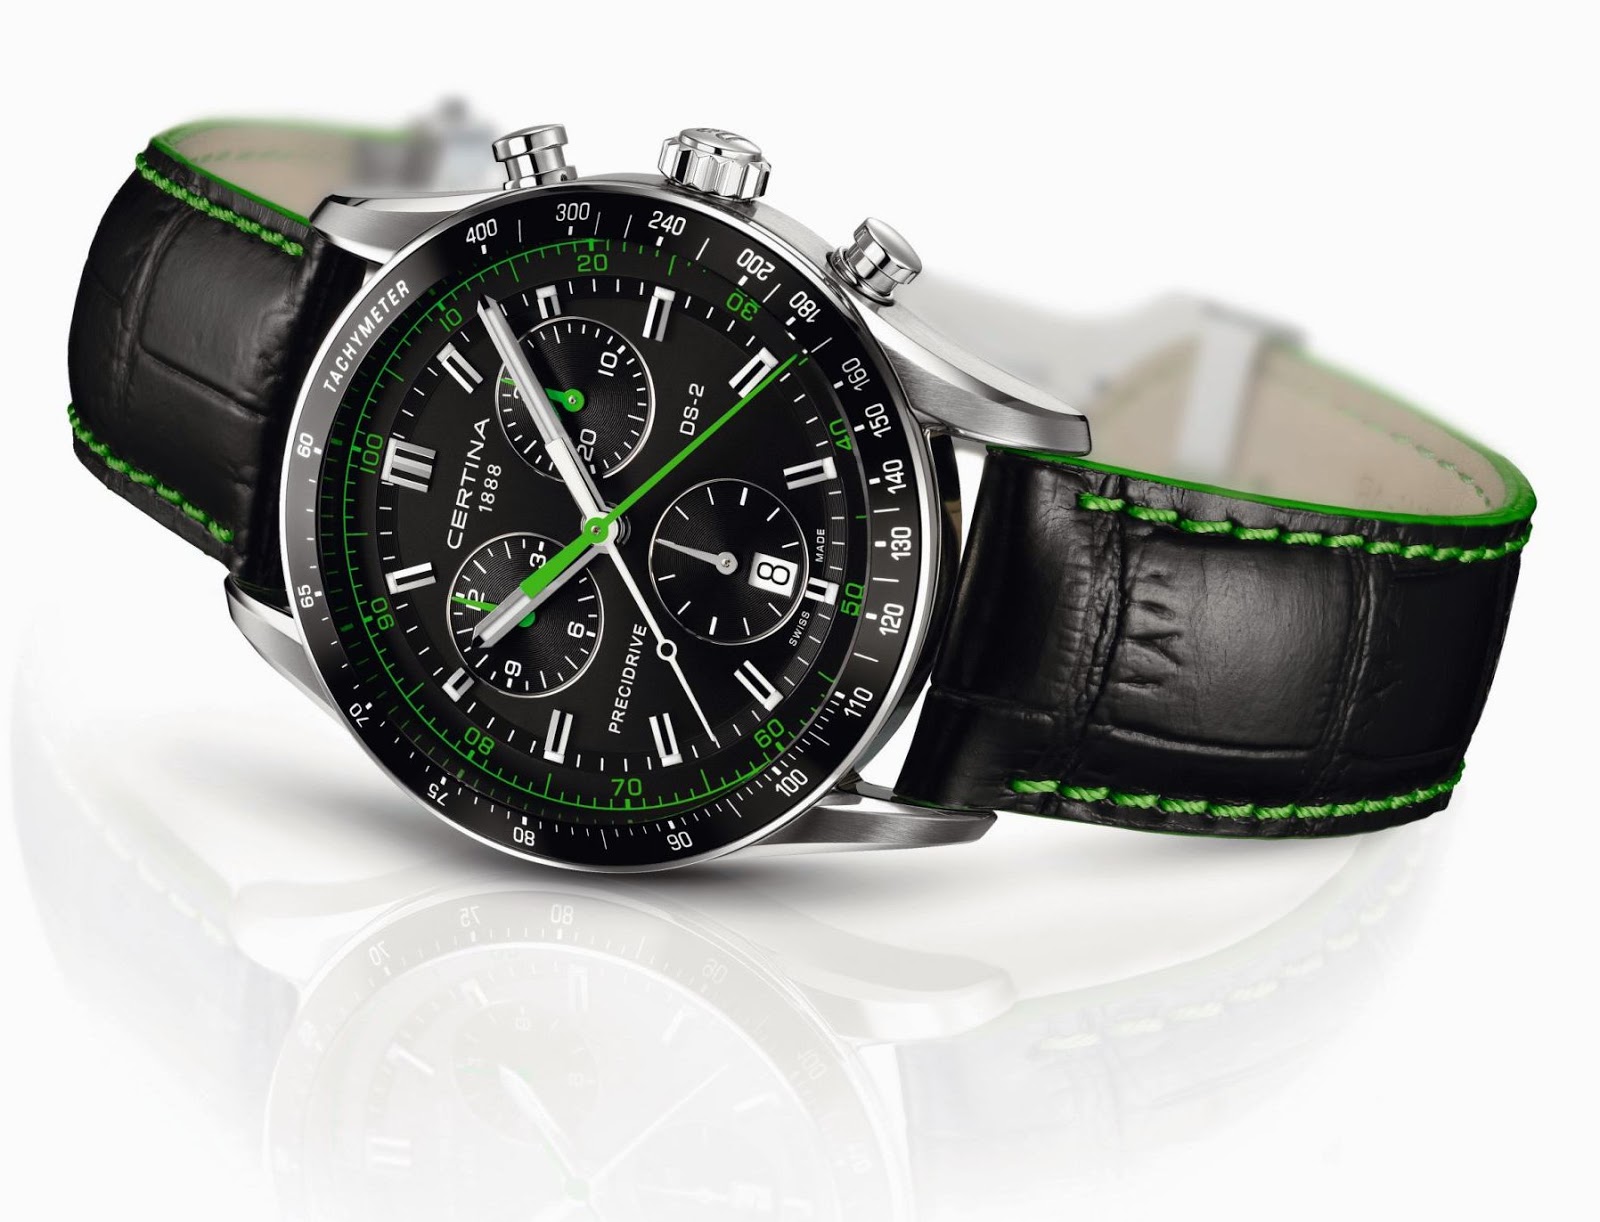 CERTINA+DS-2+Chronograph+–+New+Model(Black+dial,+Leather+strap+and+green+details).jpg